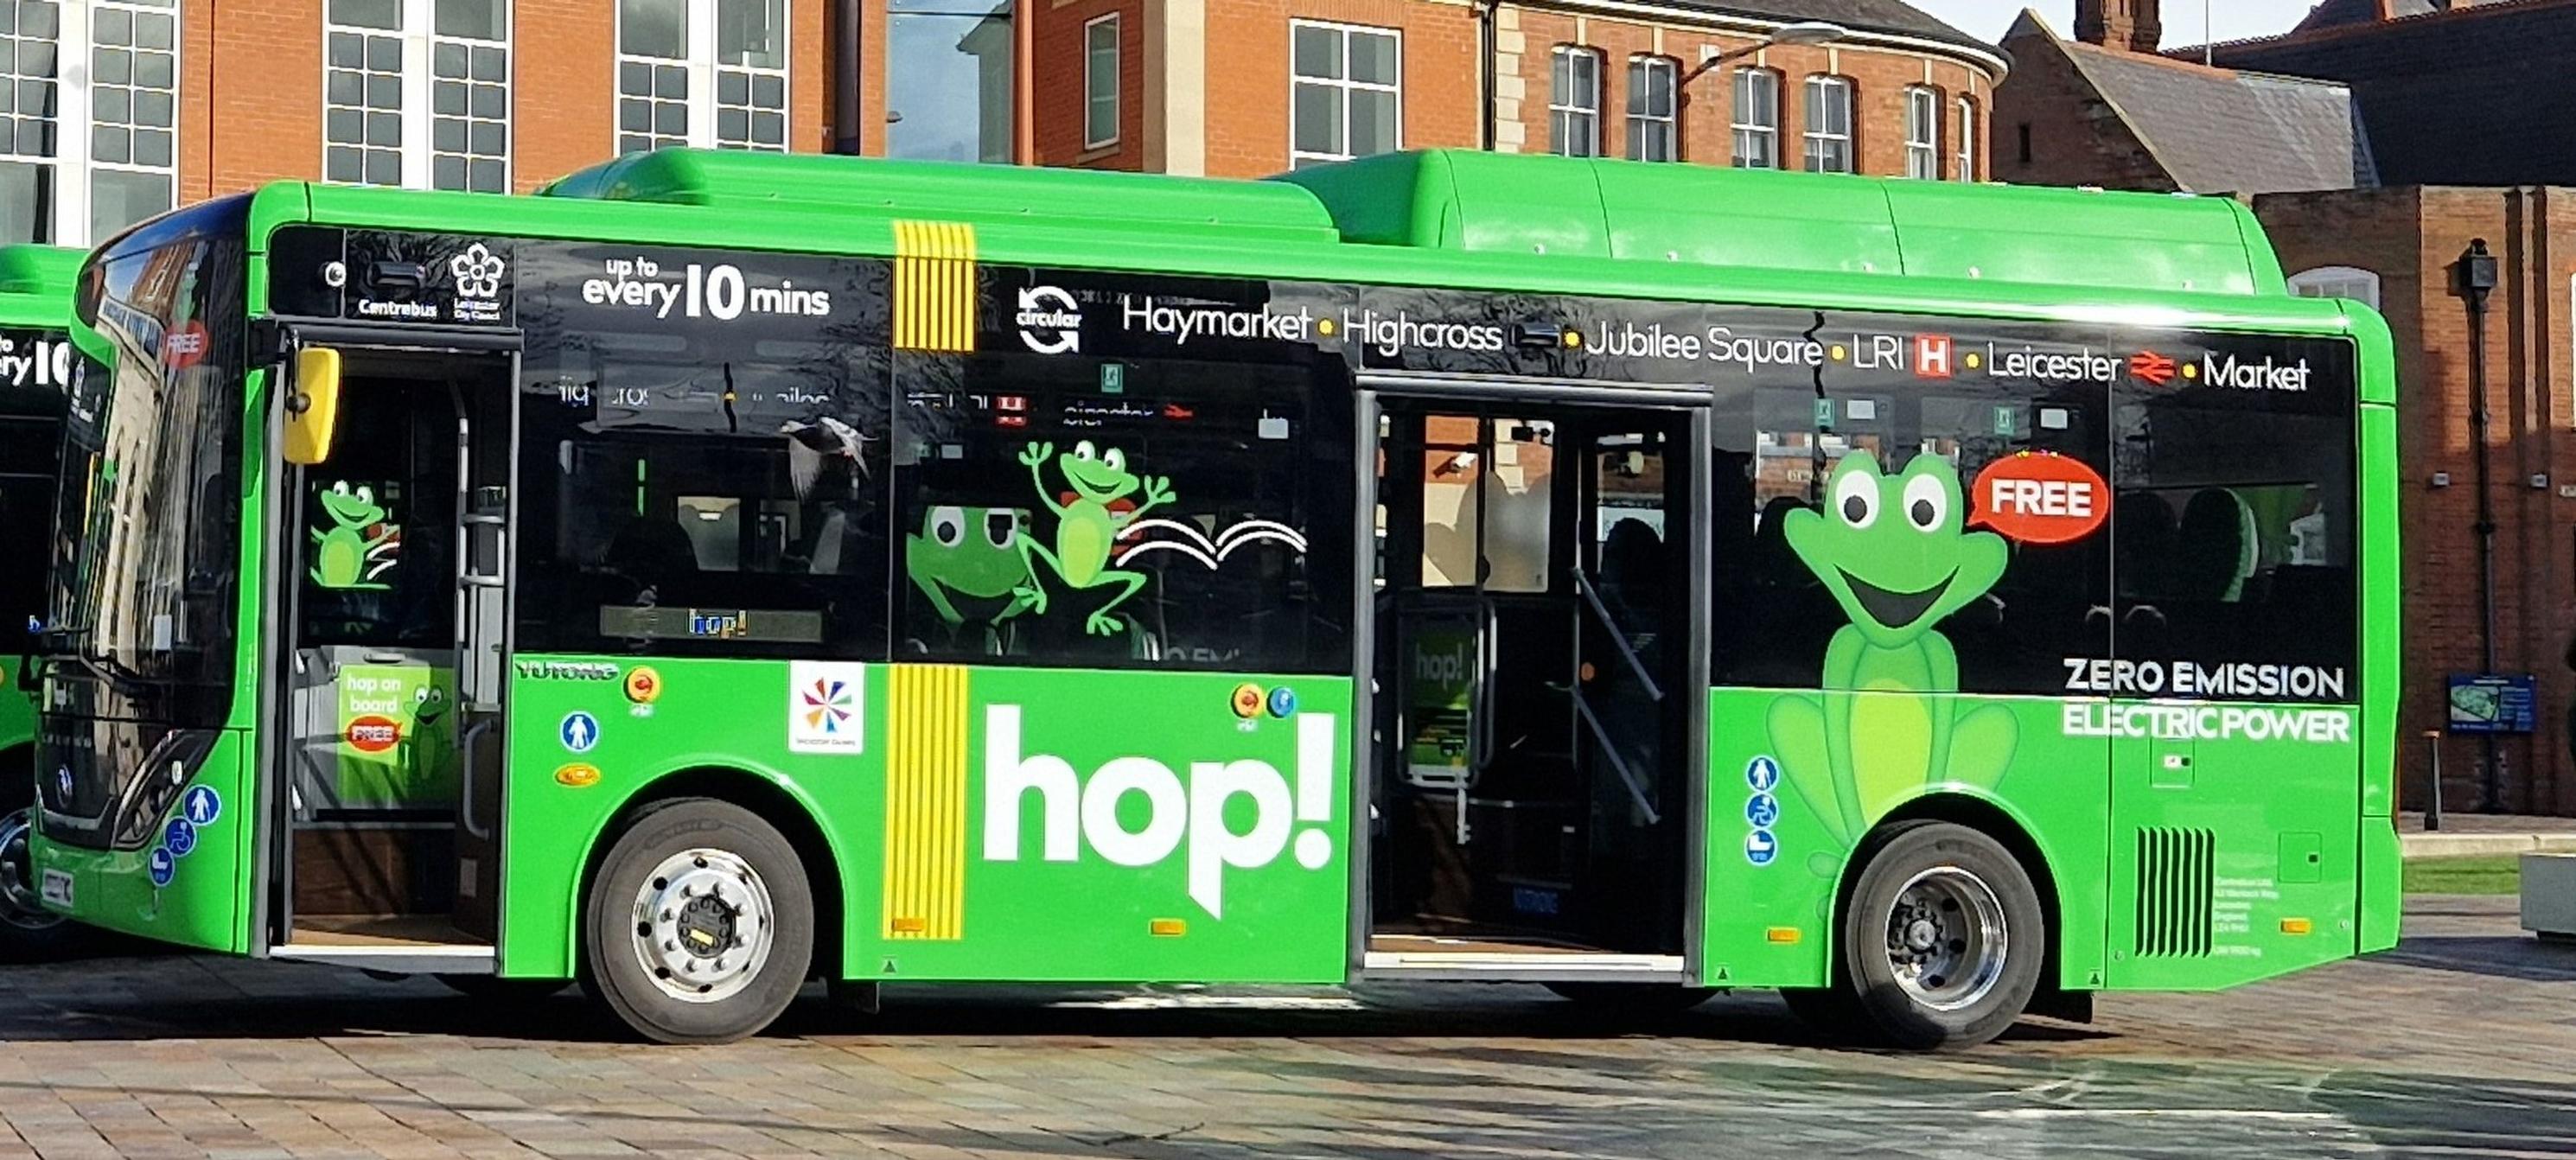 Leicester’s new free hopper city centre bus loop